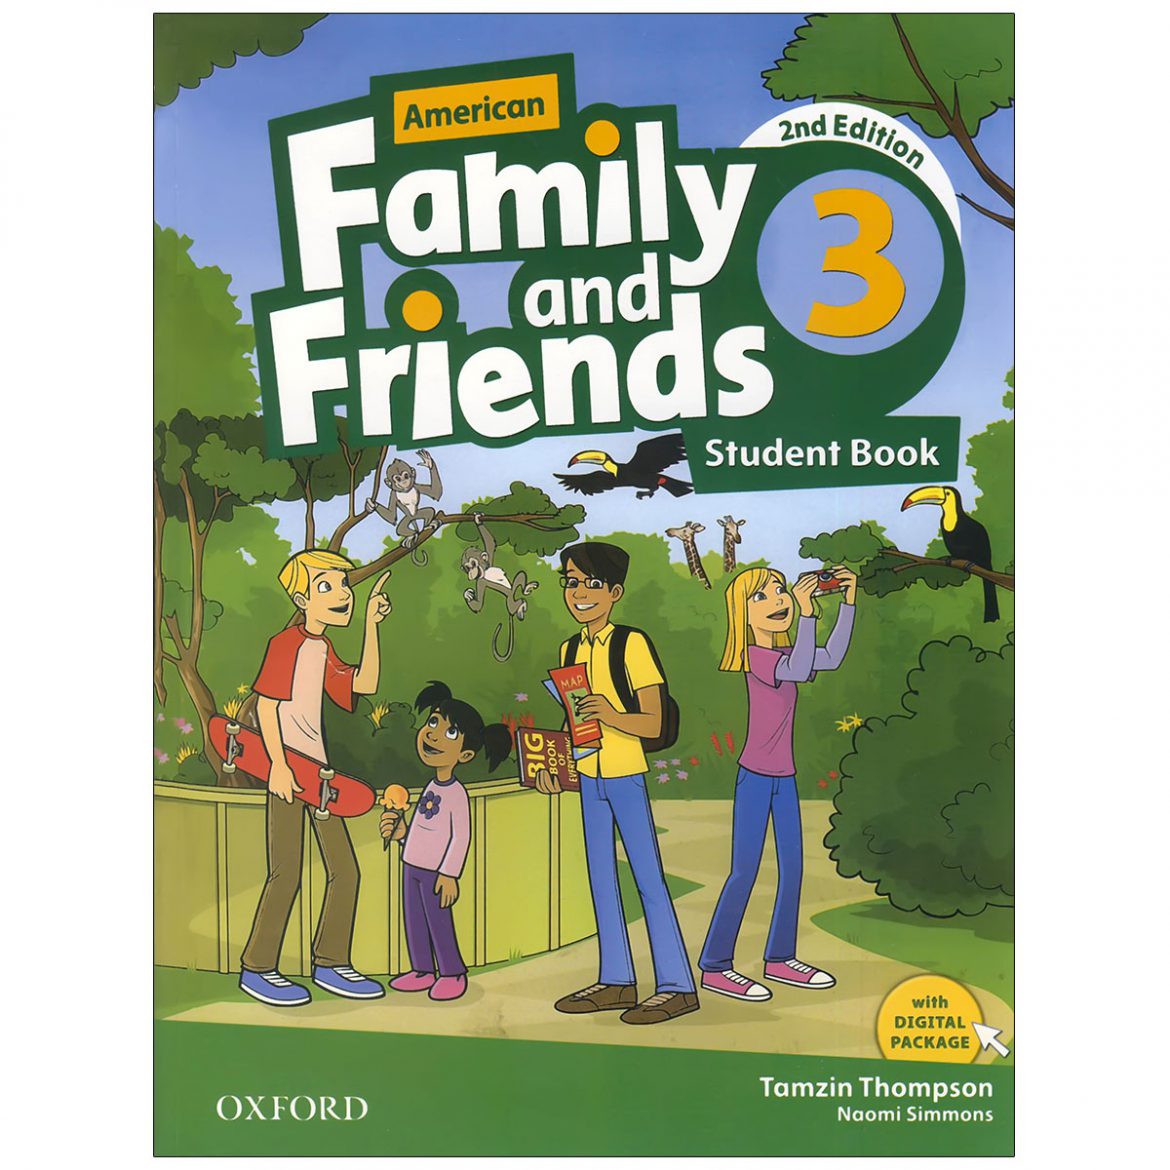 Friends 3 test book. Family and friends 2 Edition Classbook. 2nd Edition Family friends Workbook Oxford Naomi Simmons. Oxford Family and friends 3. Family and friends 3 class book.